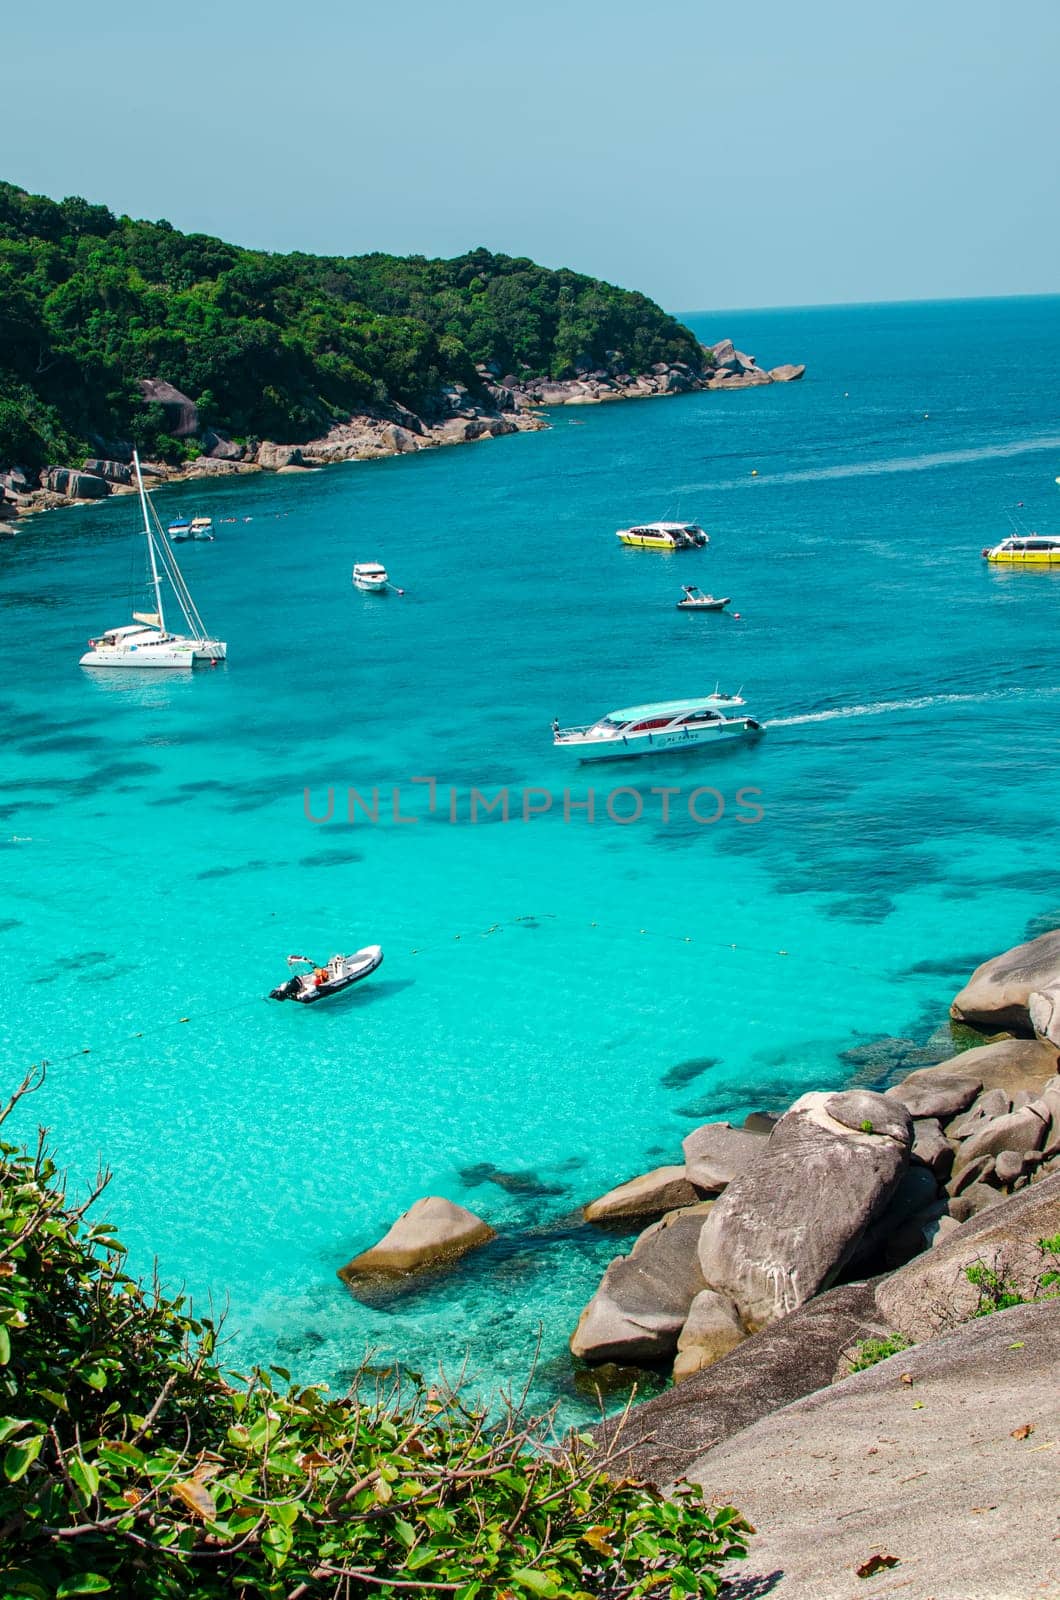 Tropical islands of ocean blue sea water and white sand beach at Similan Islands with famous Sail Rock, Phang Nga Thailand nature landscape by lucia_fox